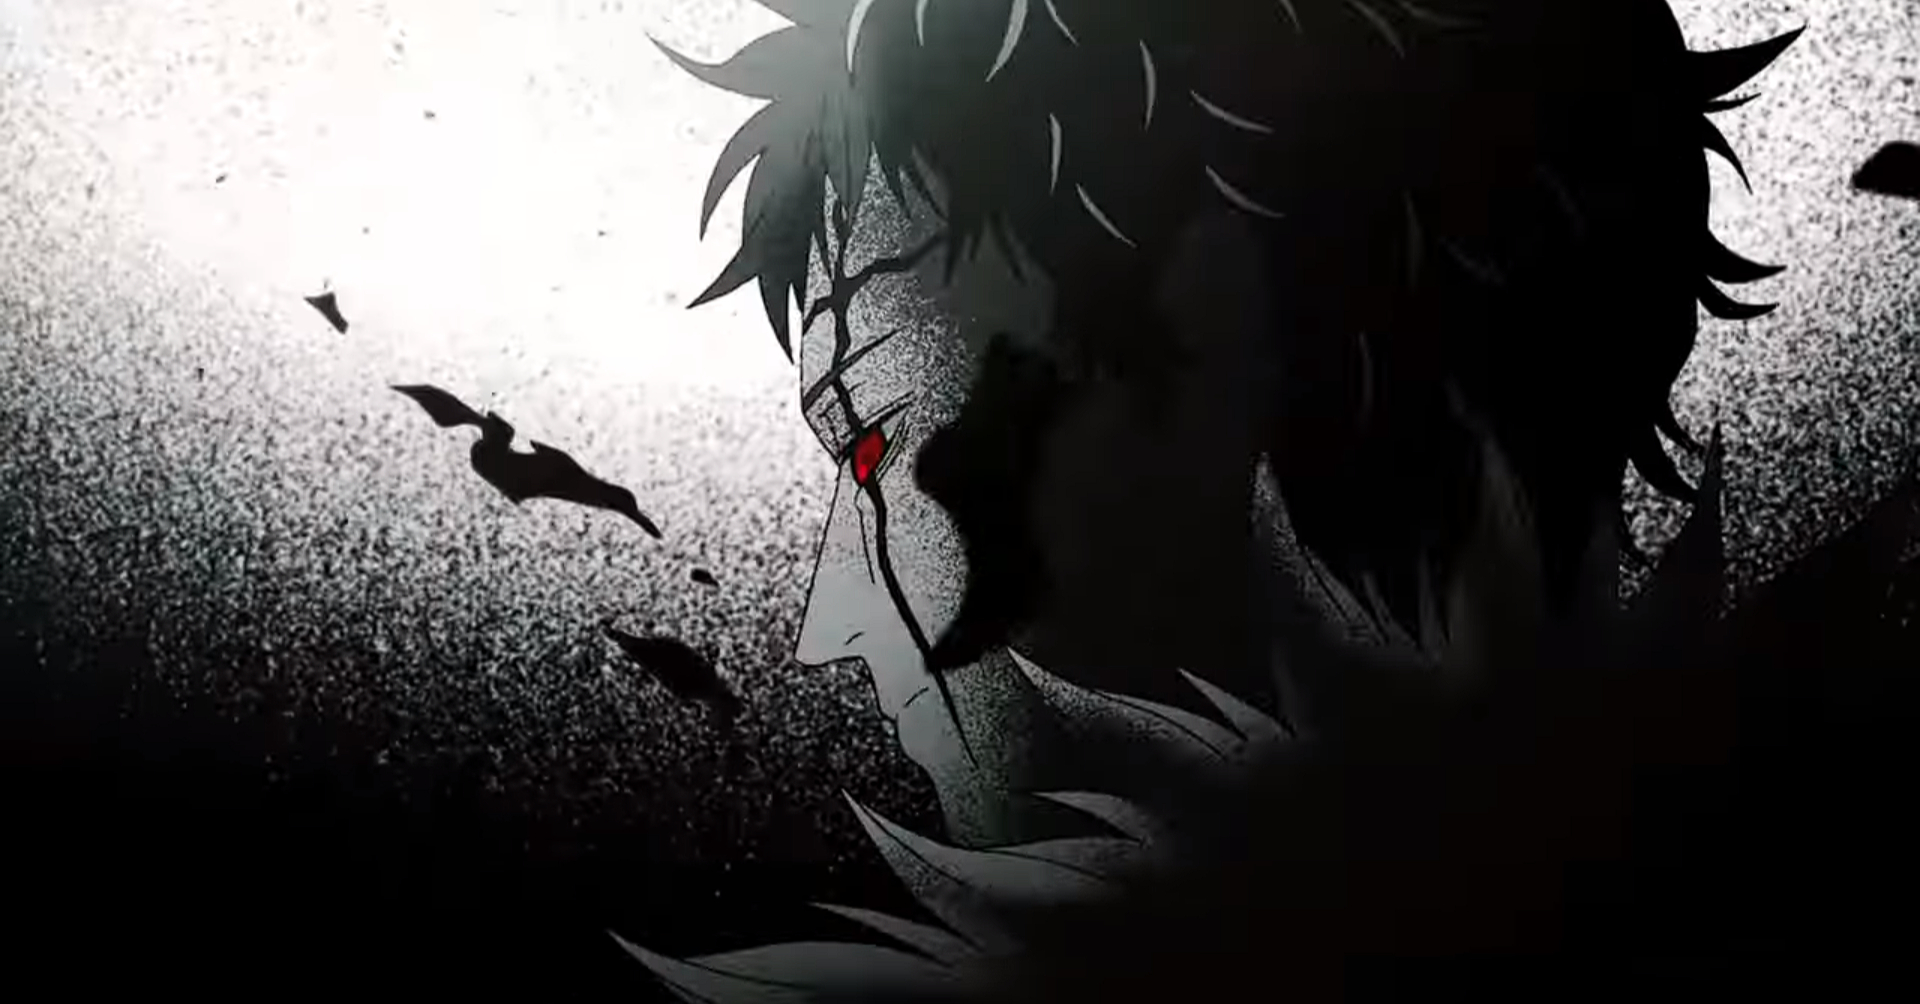 Black Clover 13th opening